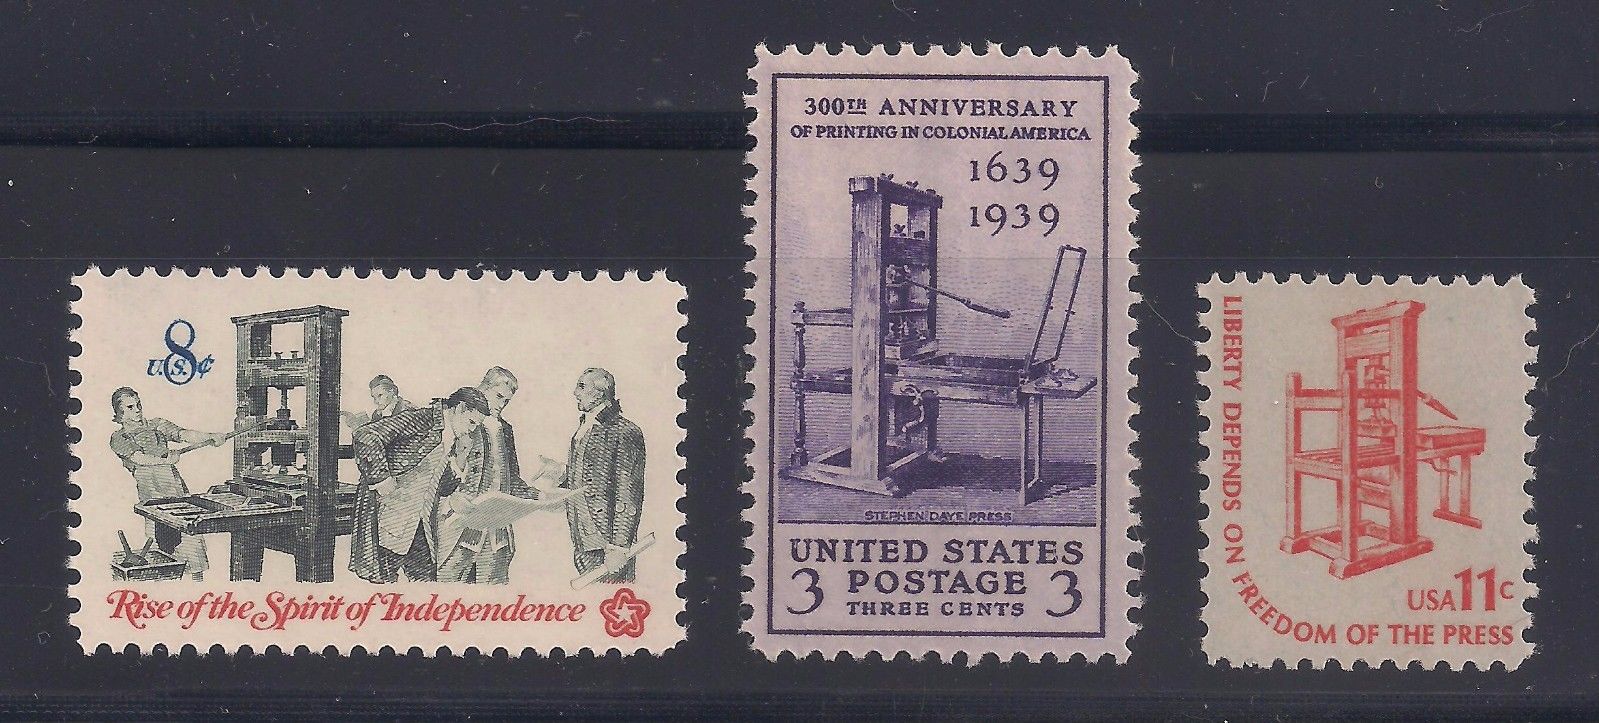 Postage Stamps showing Stephen Daye Press